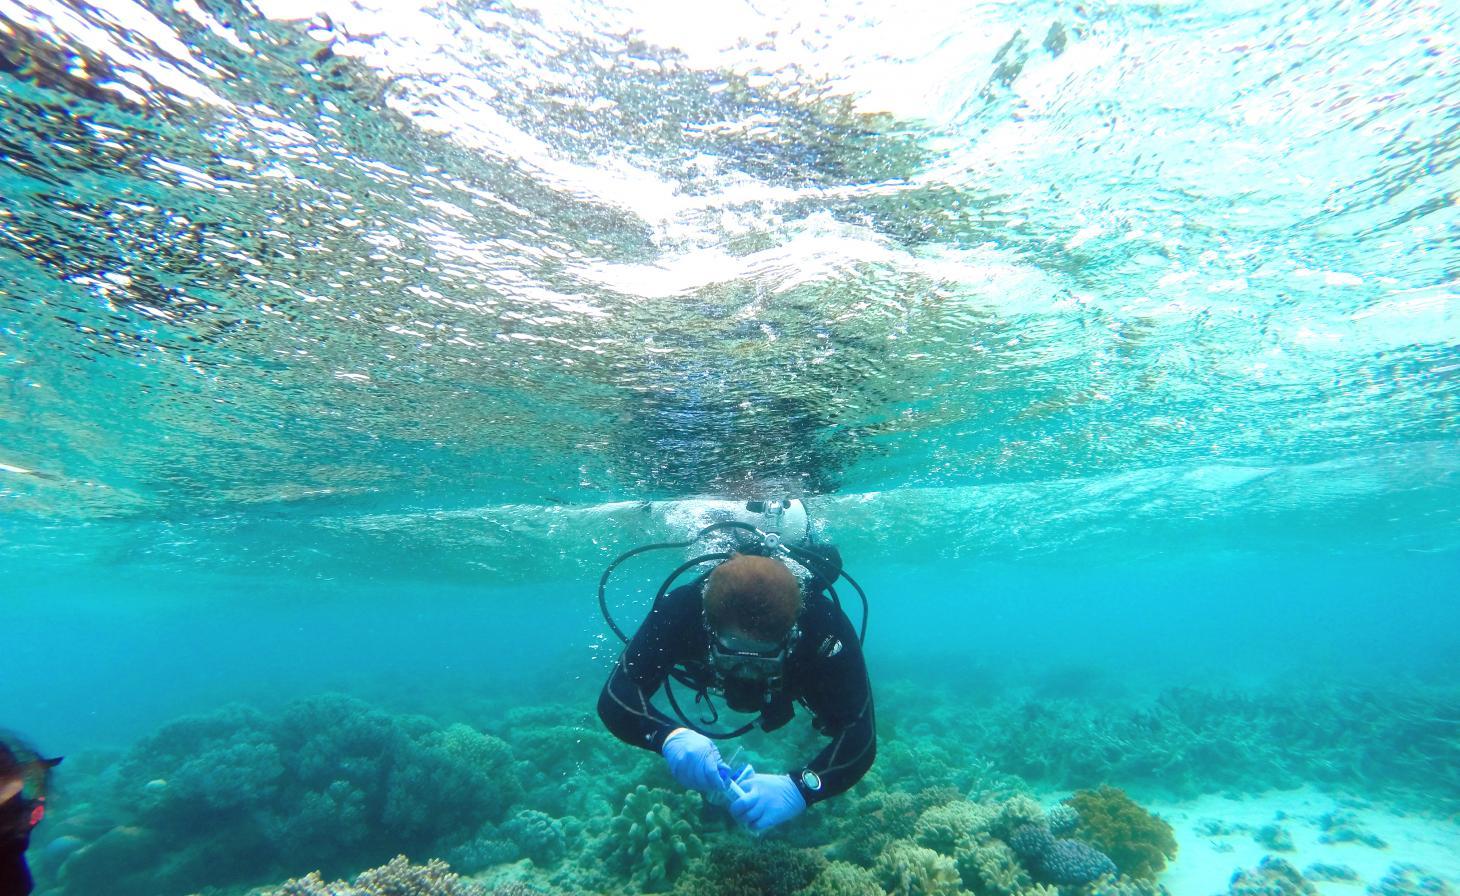 Scuba diver collecting samples in shallow ocean water.